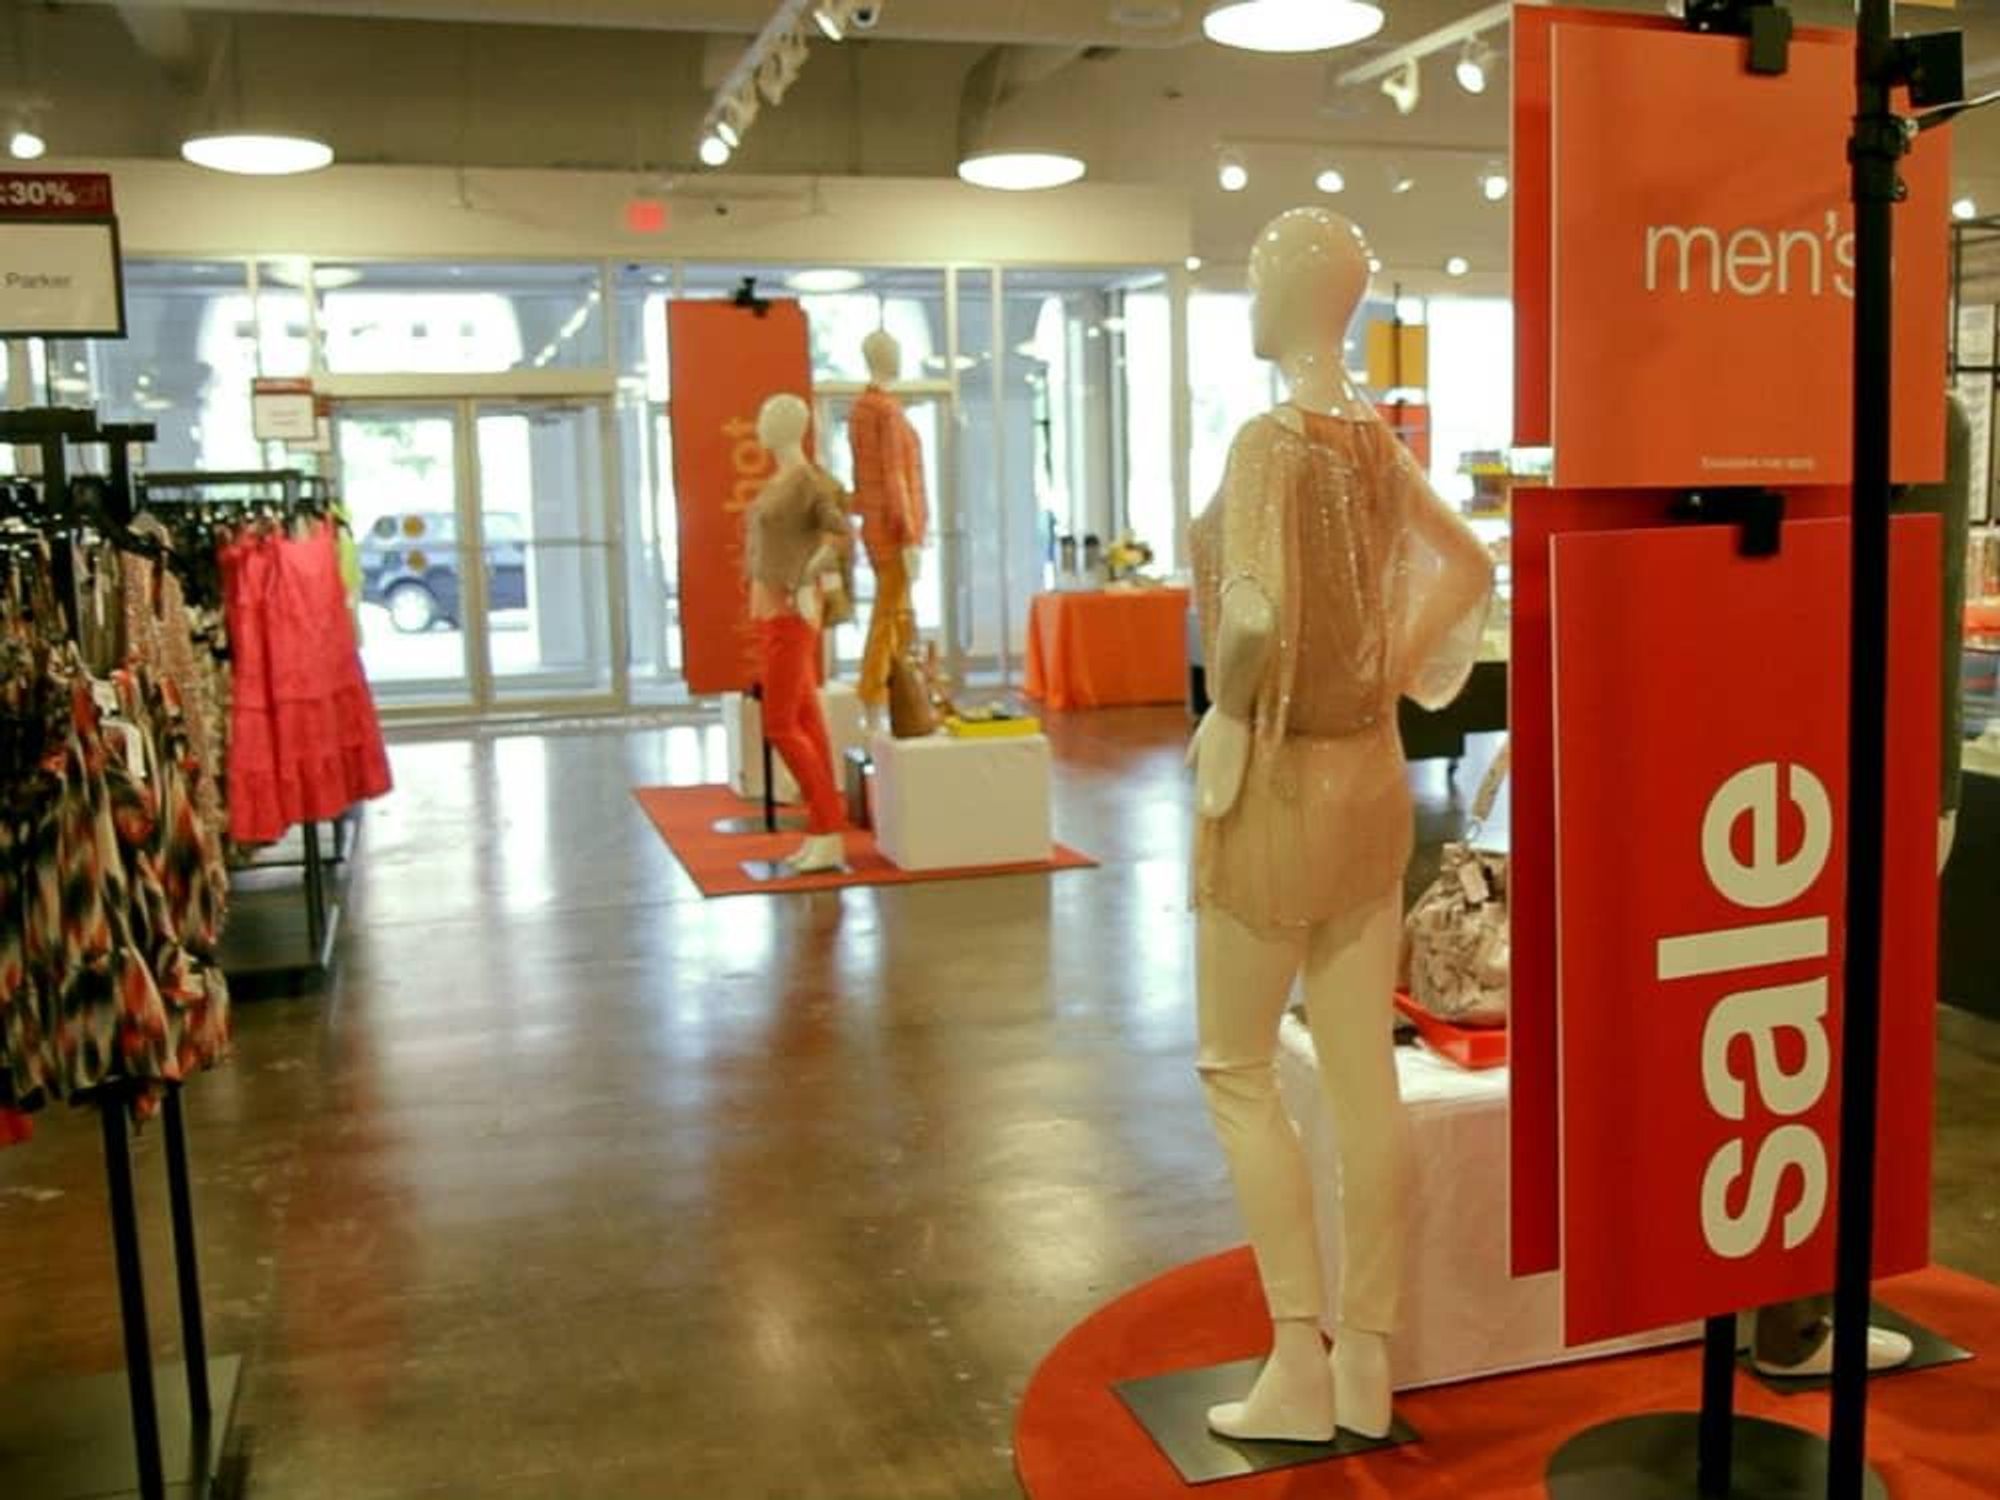 Factory Outlet Insiders: Last Call by Neiman Marcus to close at